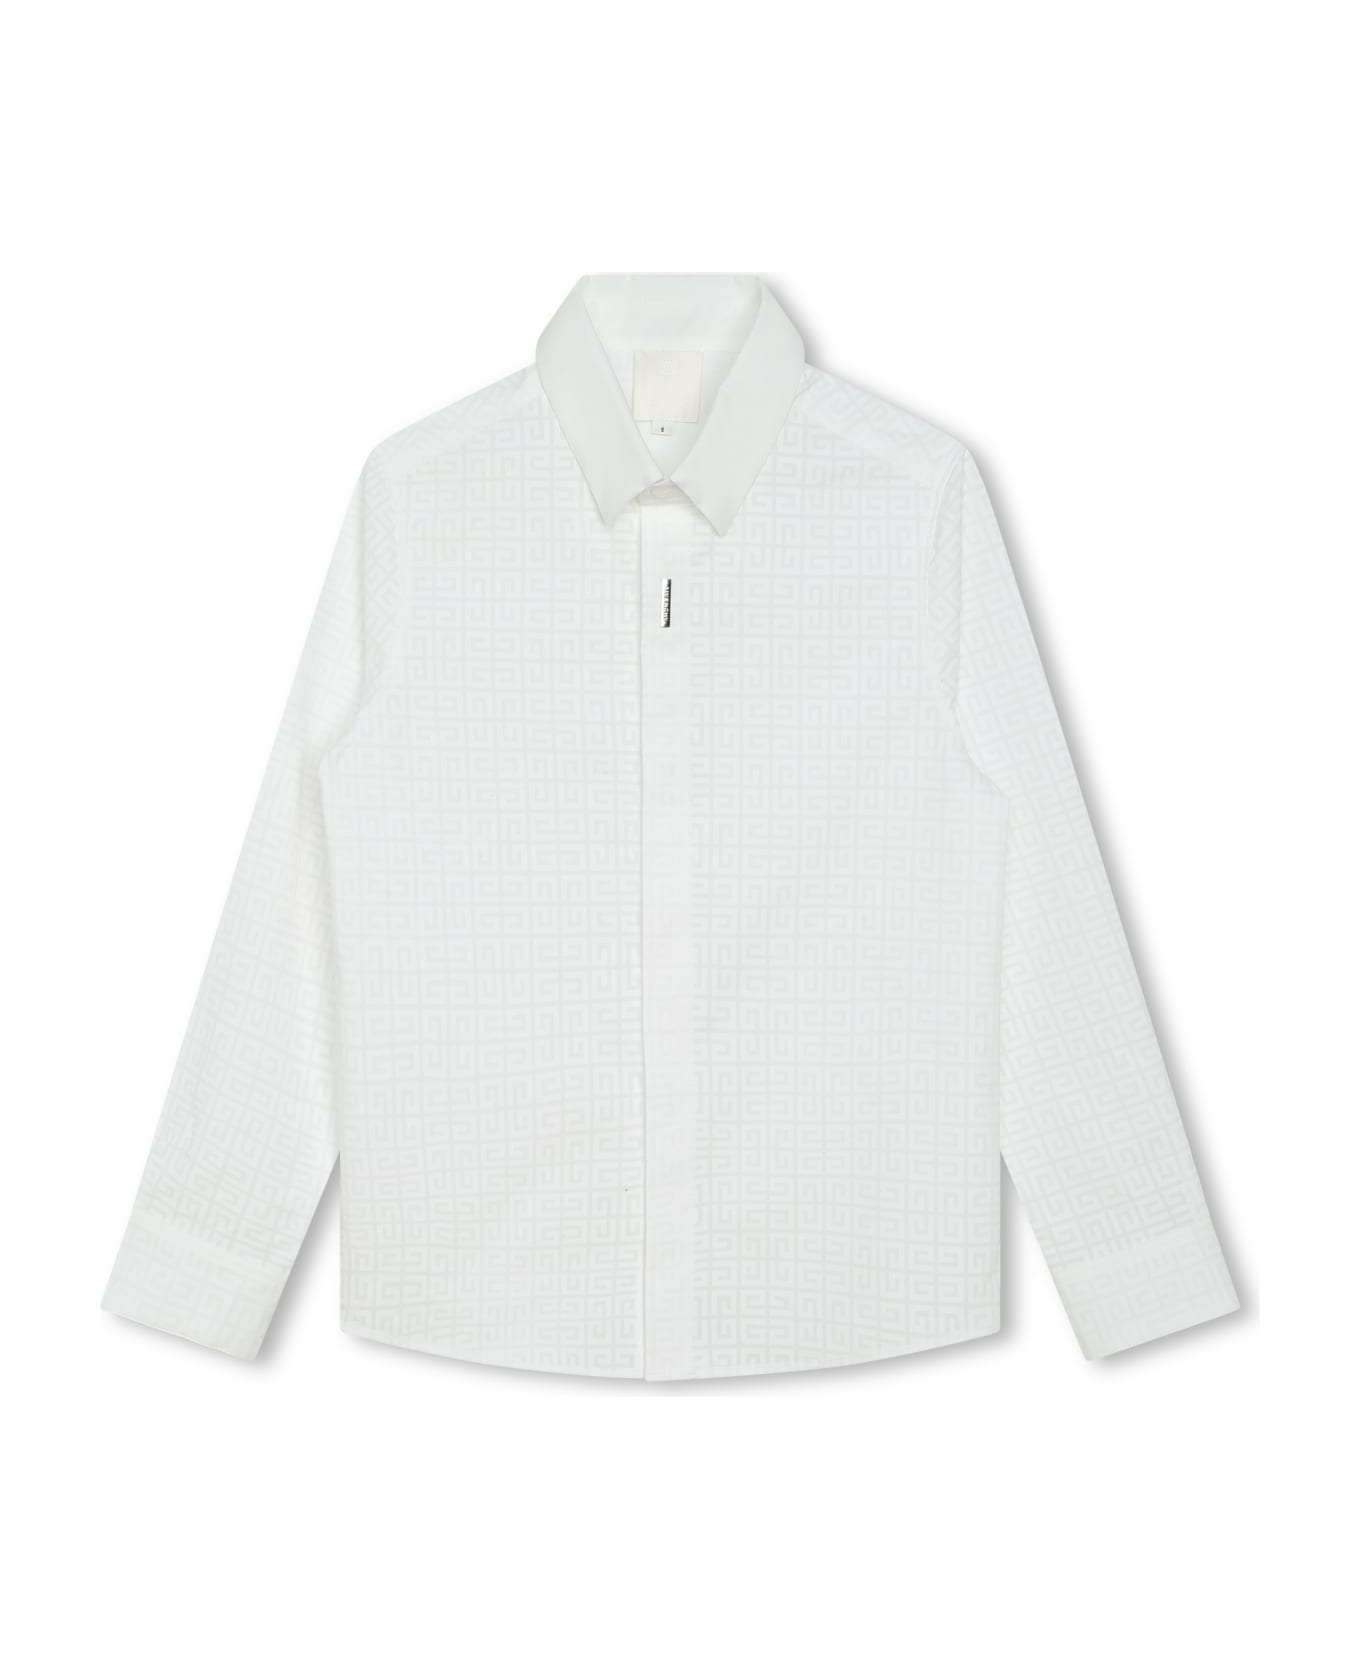 Givenchy Shirt With 4g Motif - White シャツ